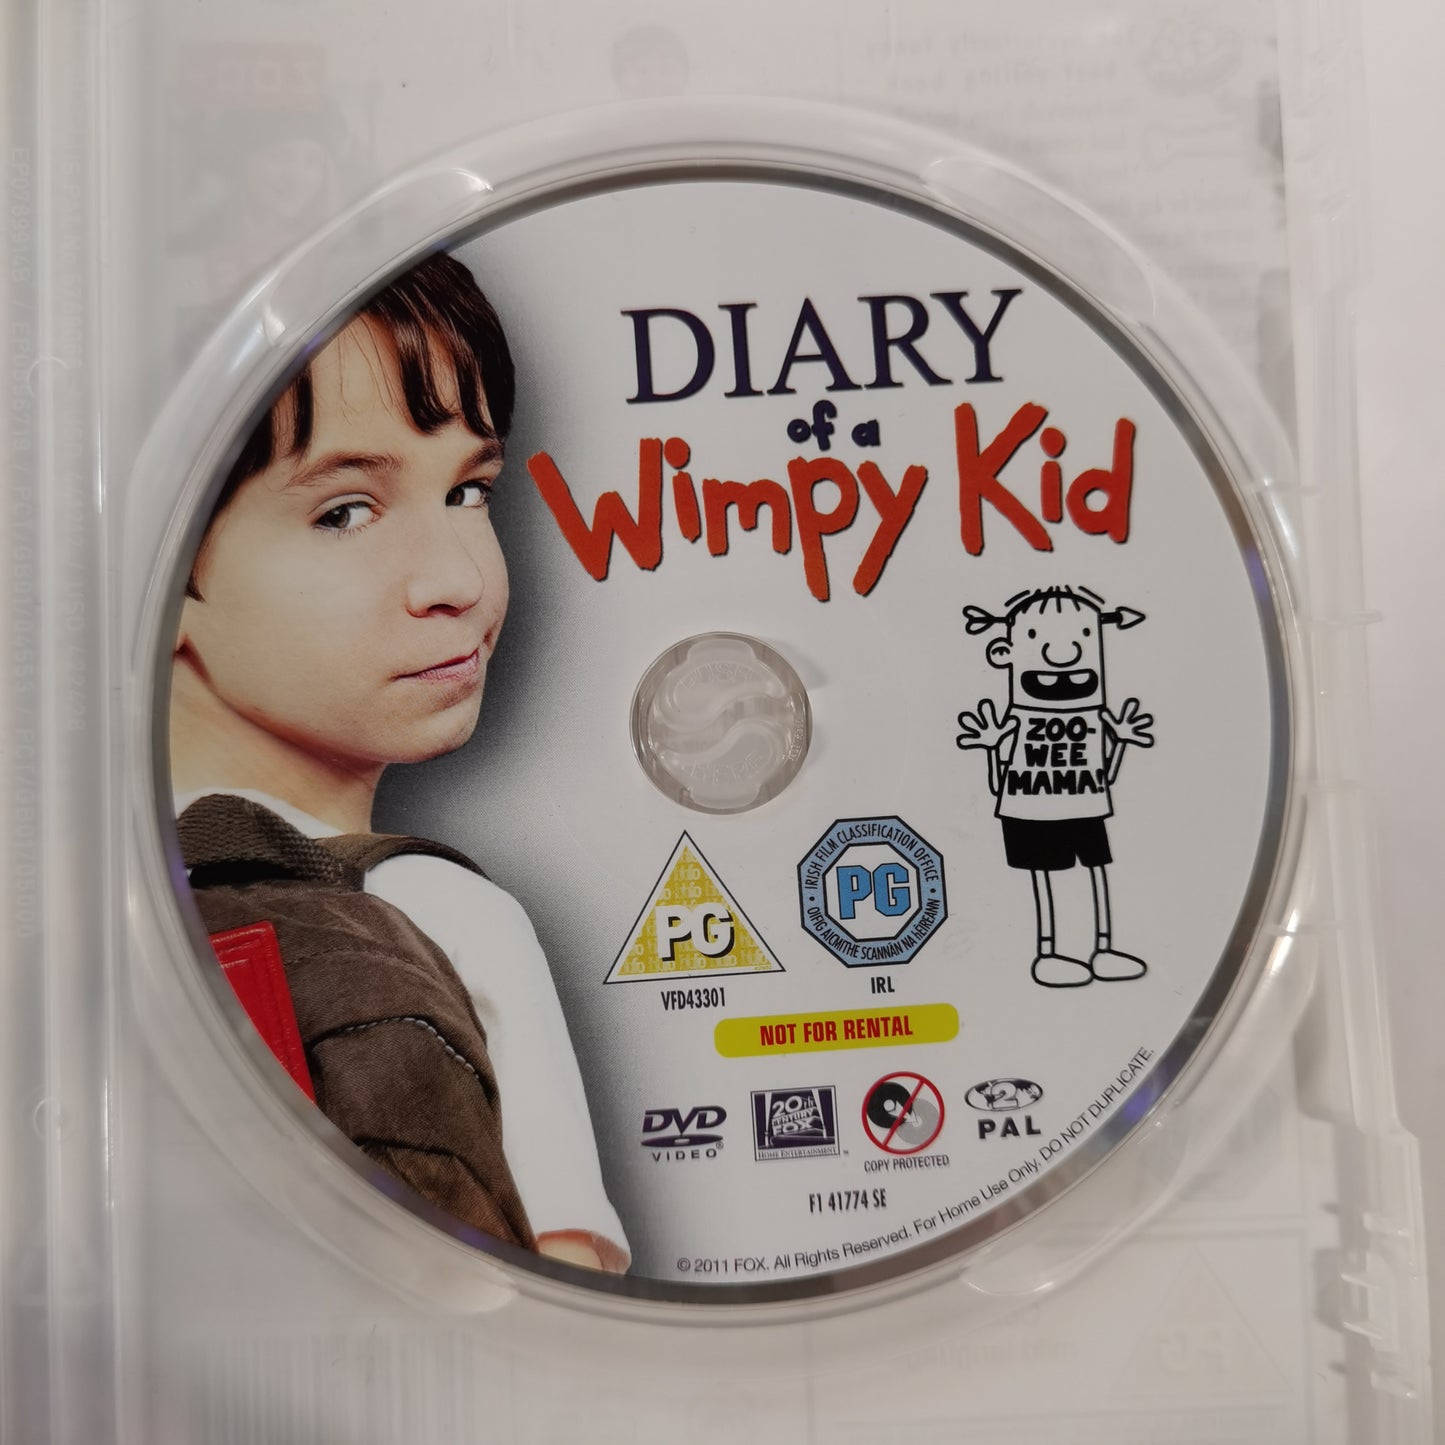 Diary of a Wimpy Kid (2010) - DVD UK 2012